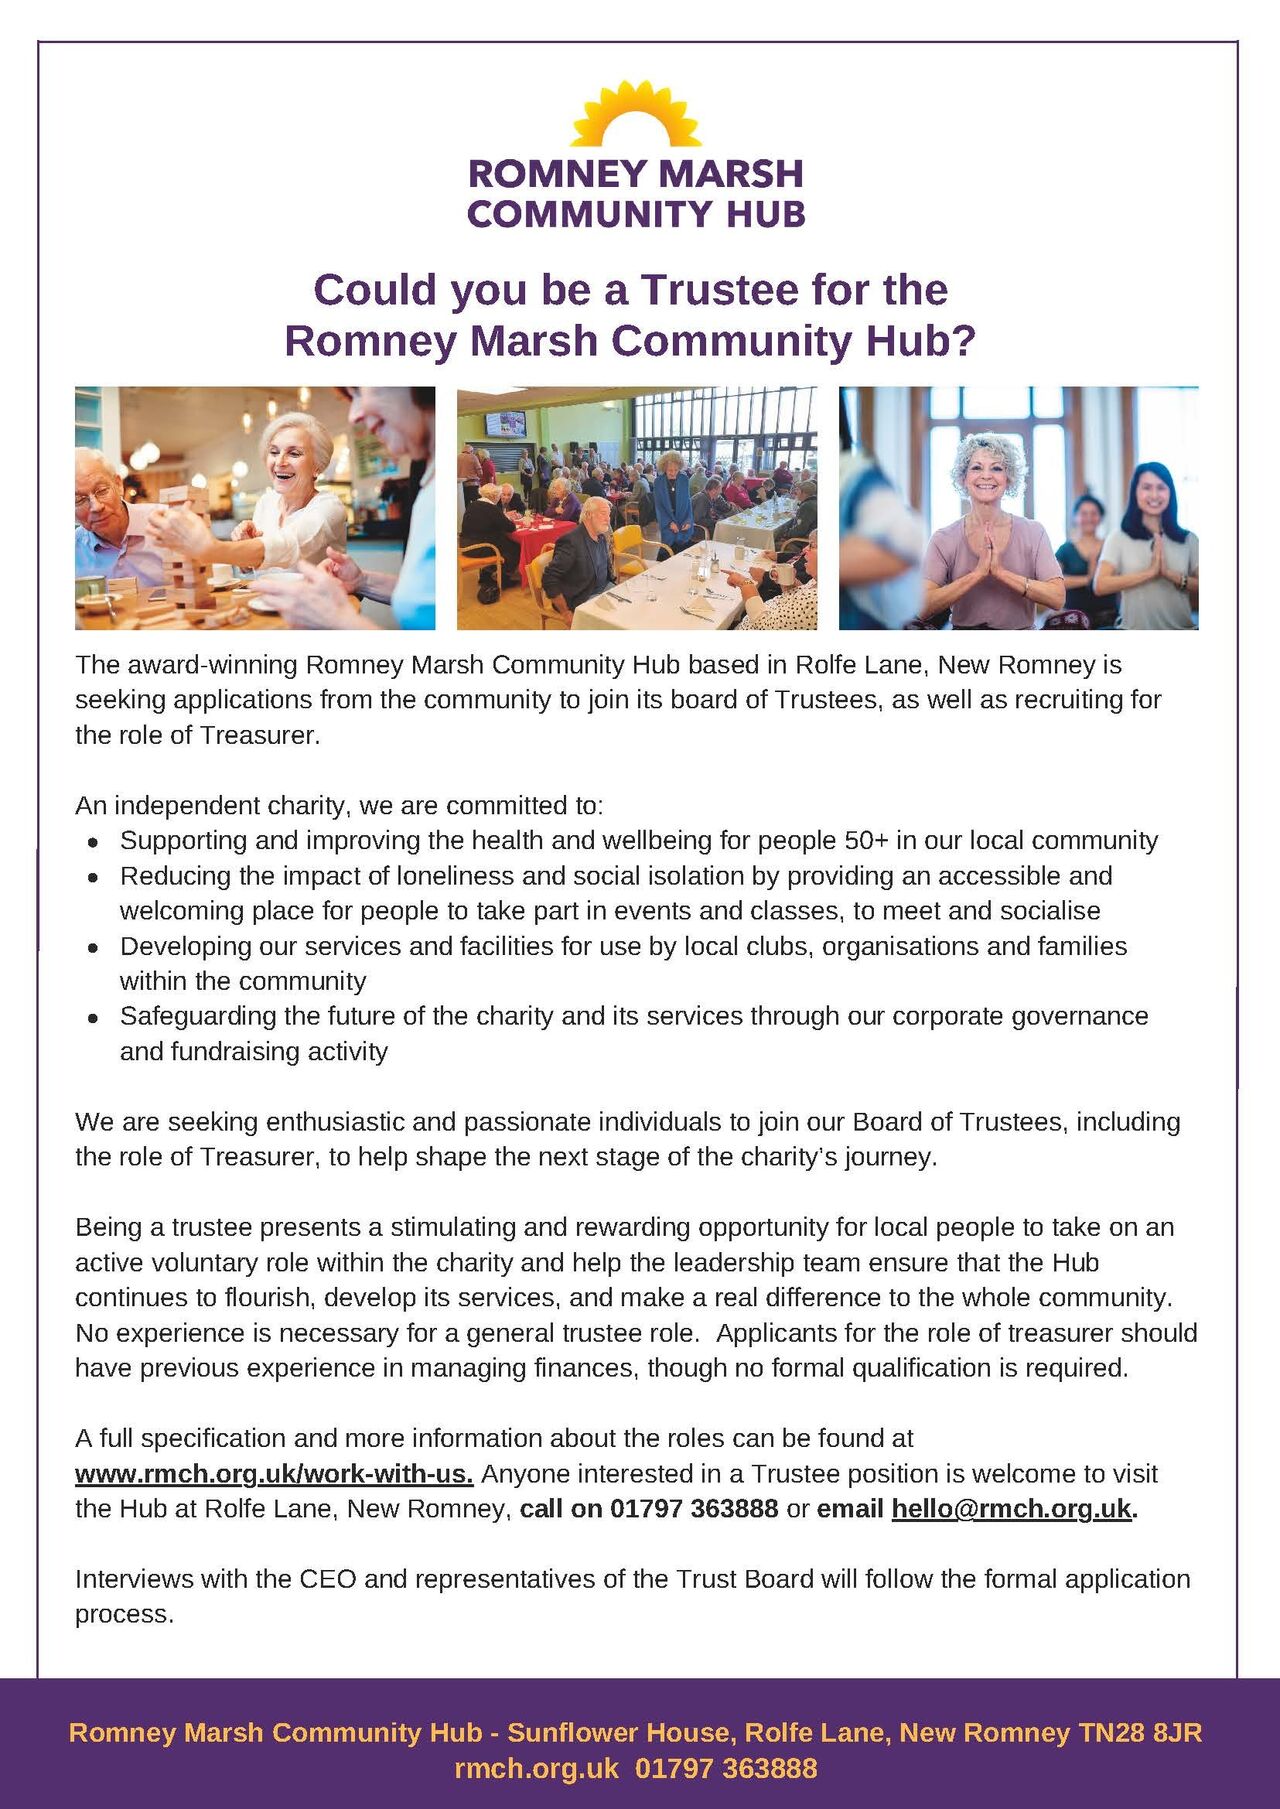 Could you be a Trustee at the Hub